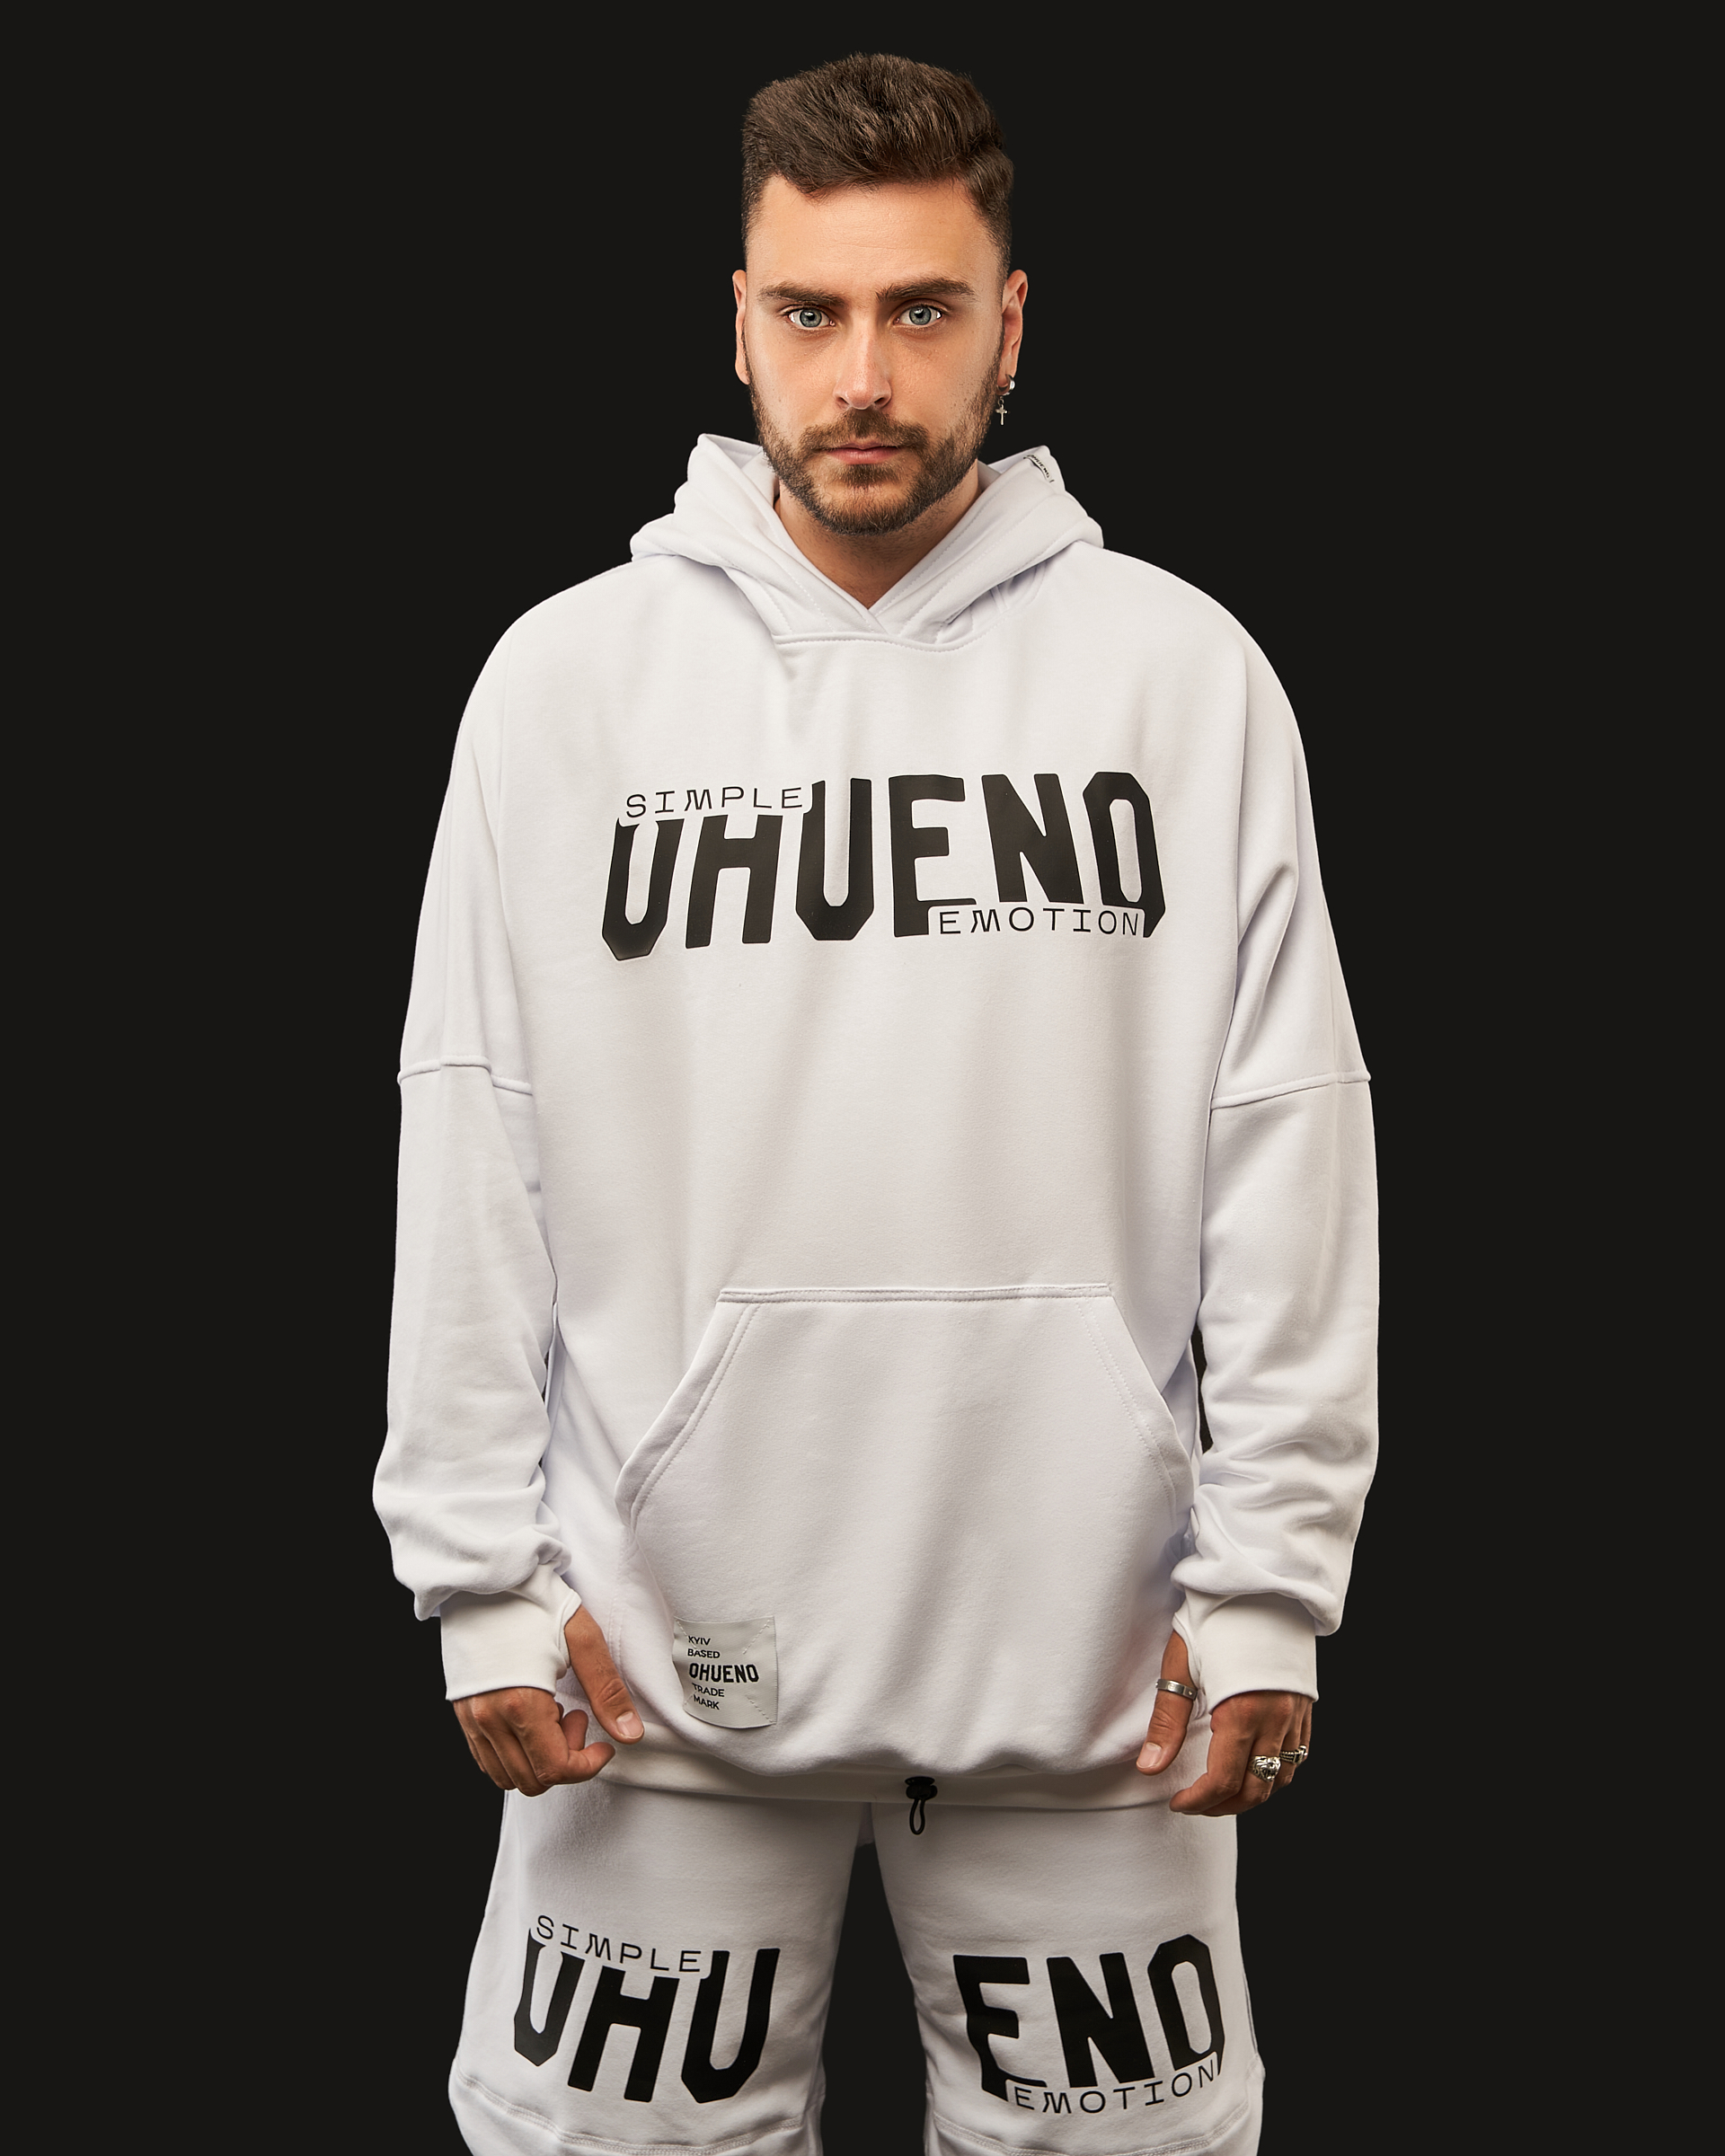 Oversized hoodie (white) Image: https://ohueno-official.com/wp-content/uploads/m01975.jpg